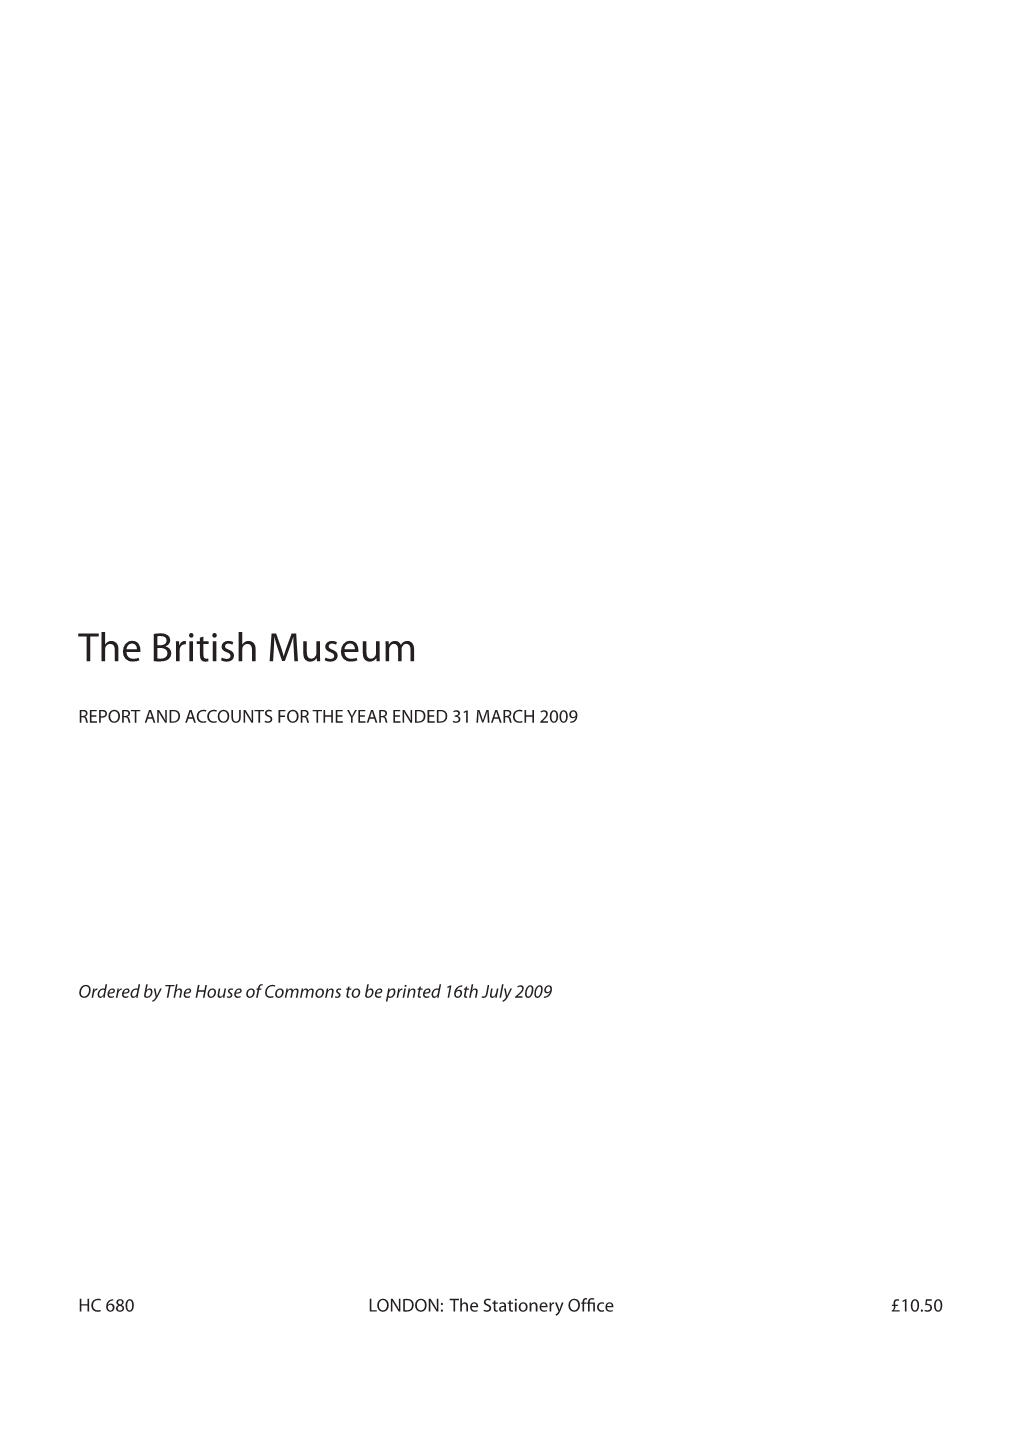 The British Museum Report and Accounts for the Year Ended 31